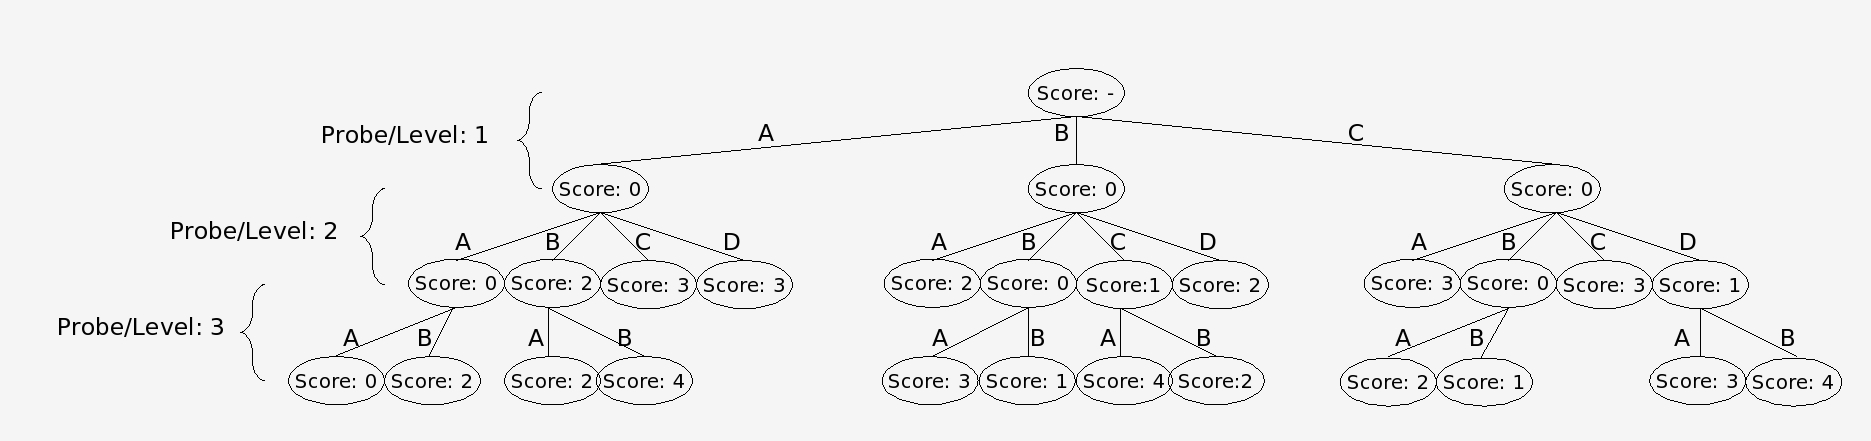 Nodes are trims via the branch and bound algorithm using the conflict matrix as input.